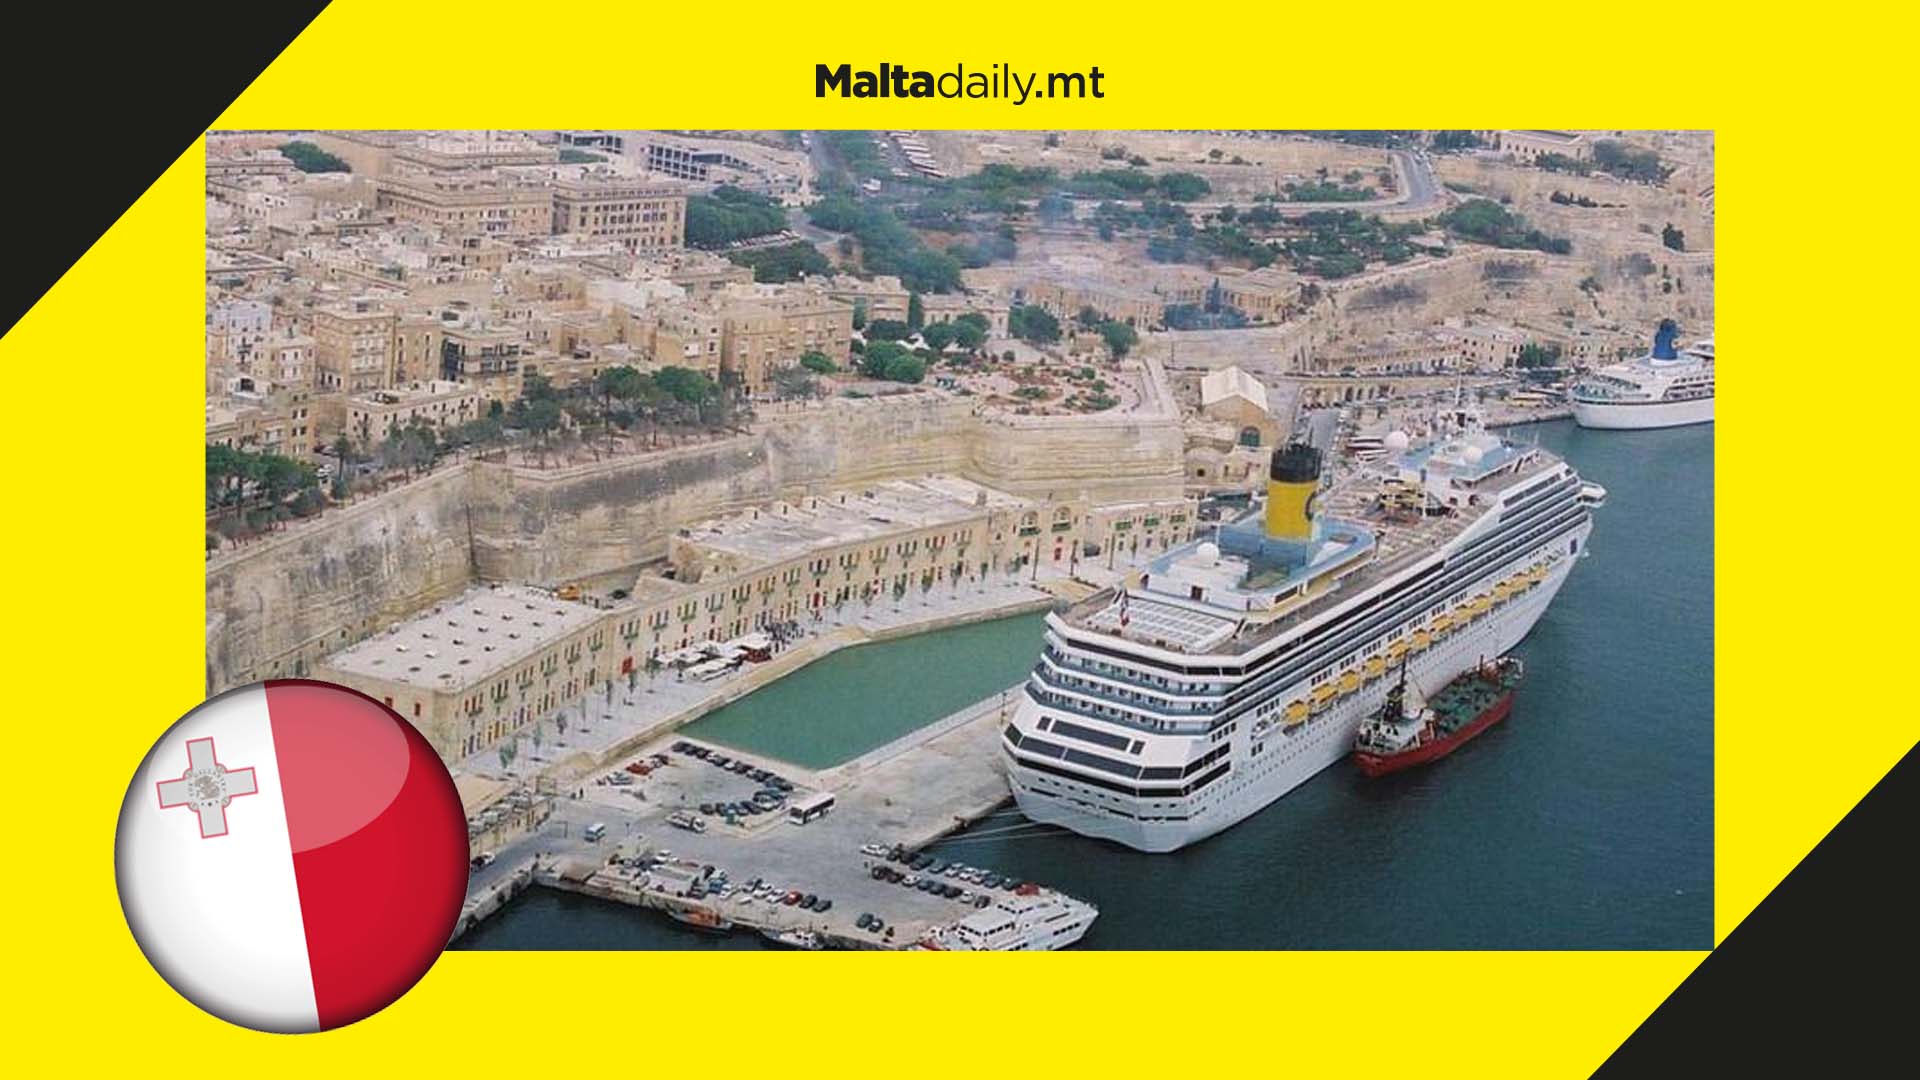 First three months of 2022 saw 23 cruise-liners dock in Malta